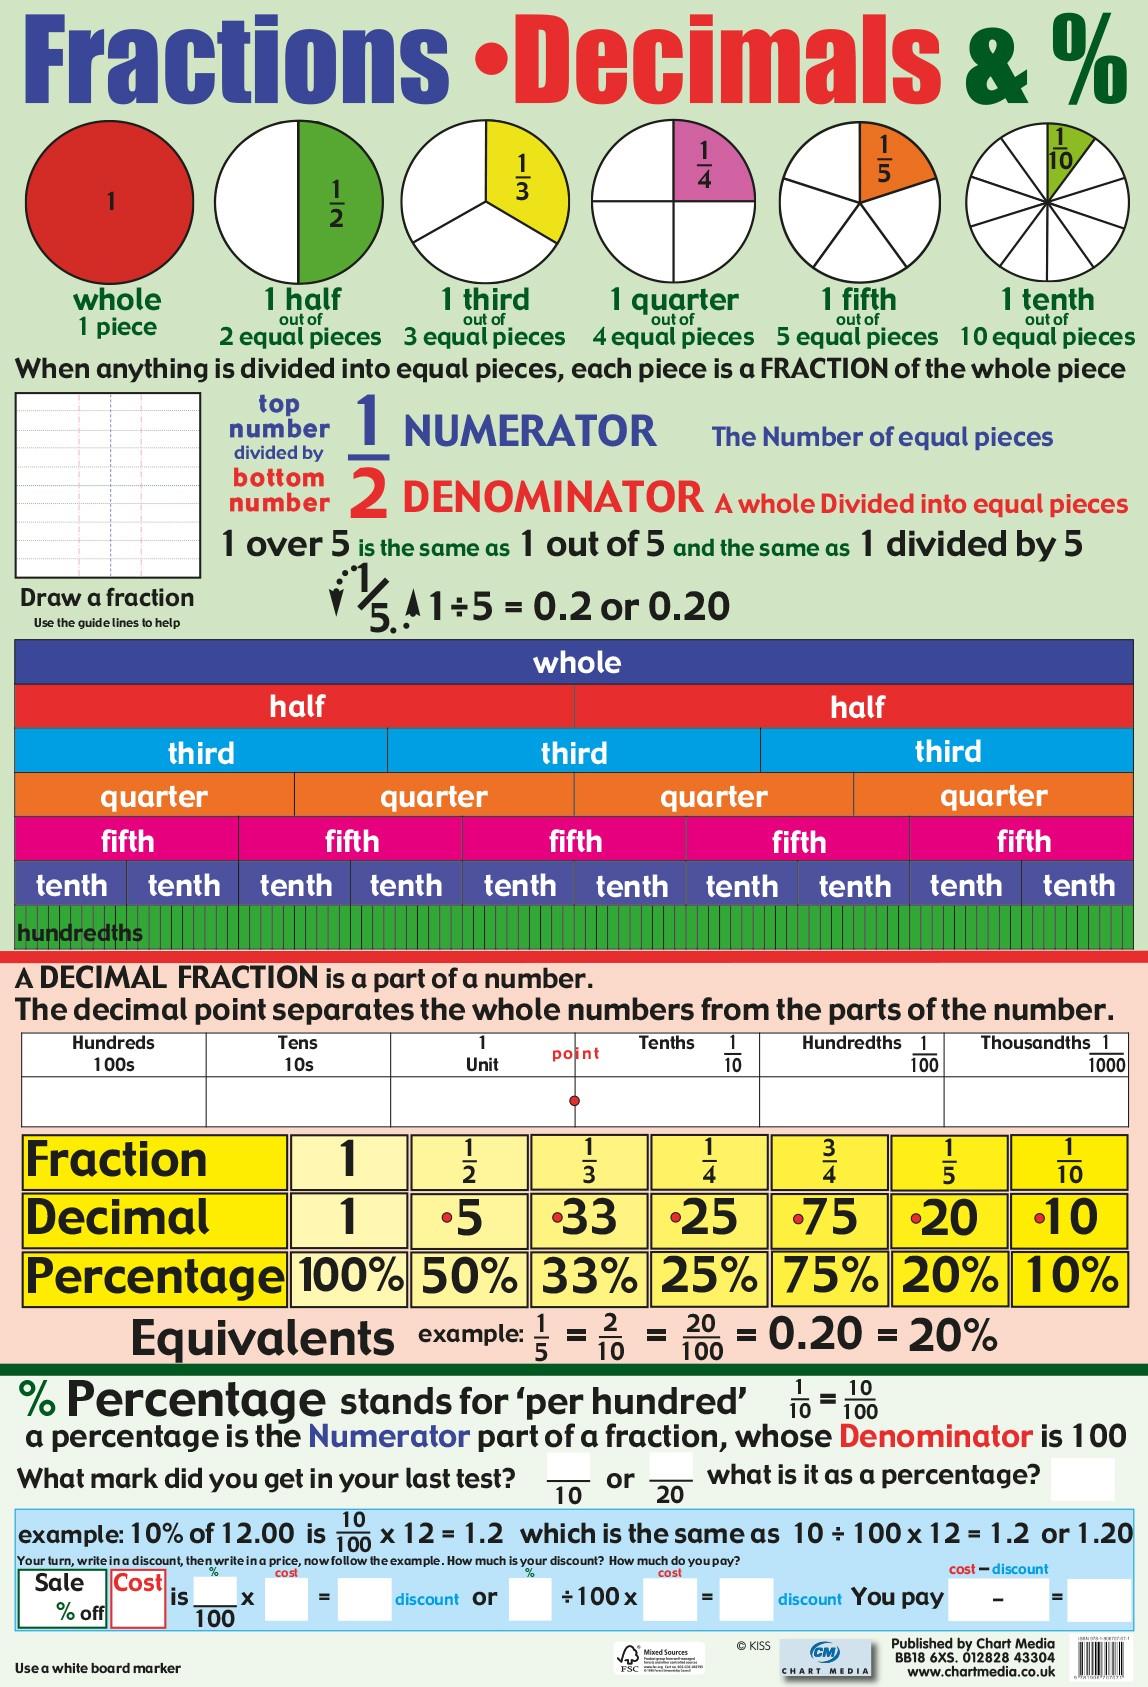 (Bashed) Fractions & Decimals Wall Chart